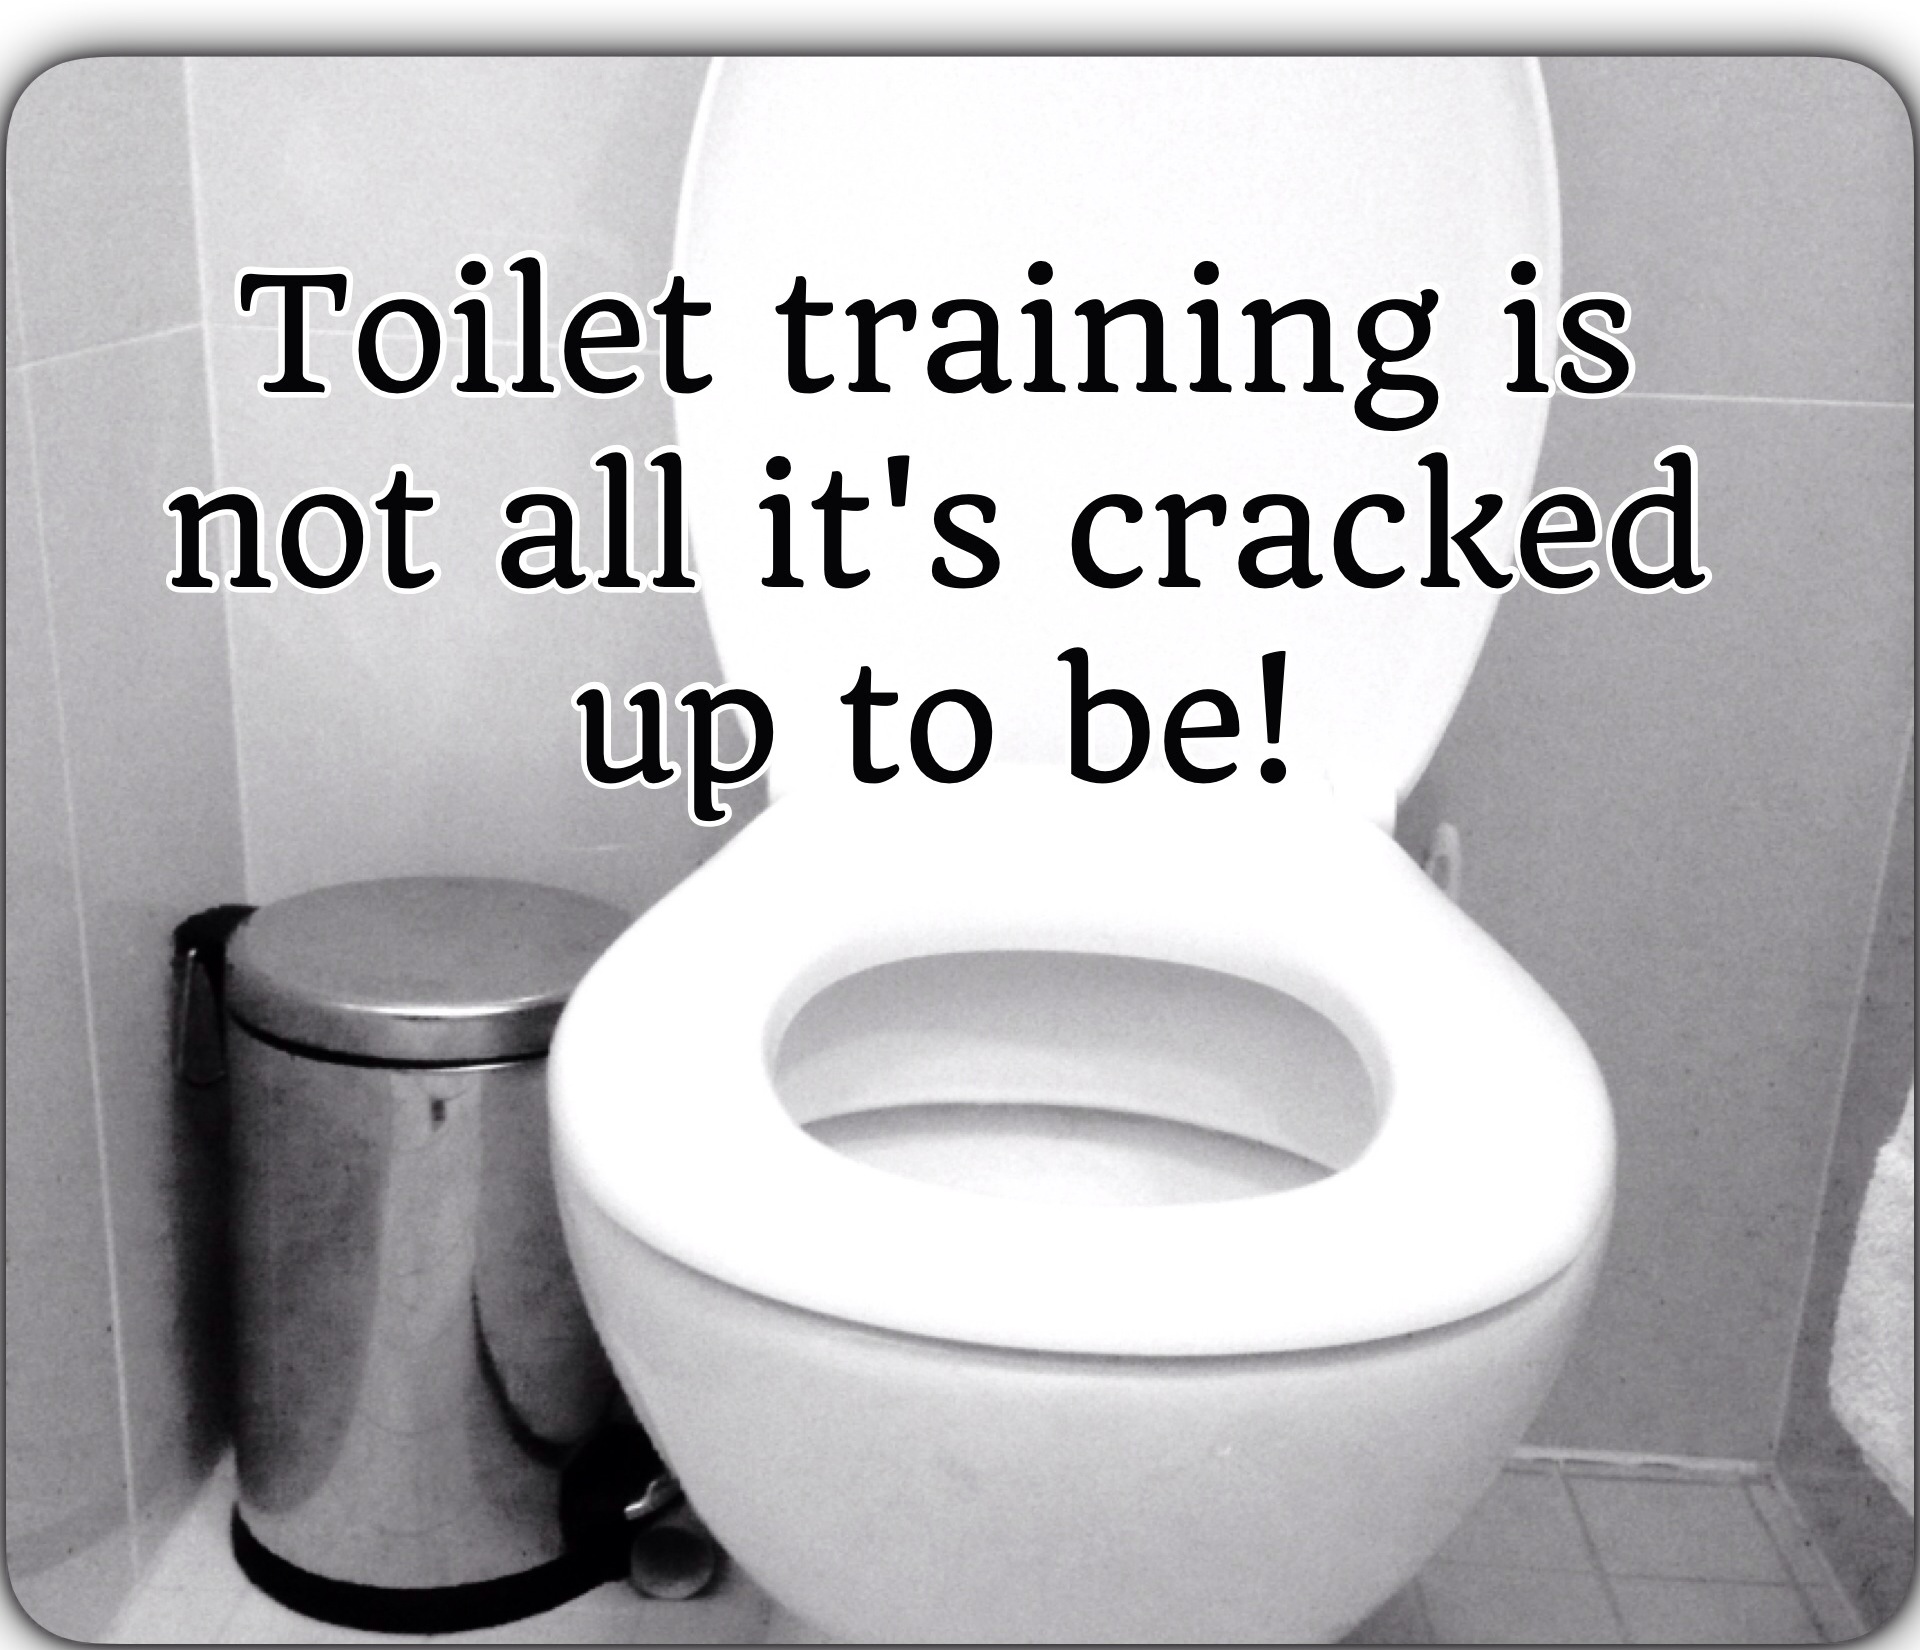 Are you toilet training in your house?